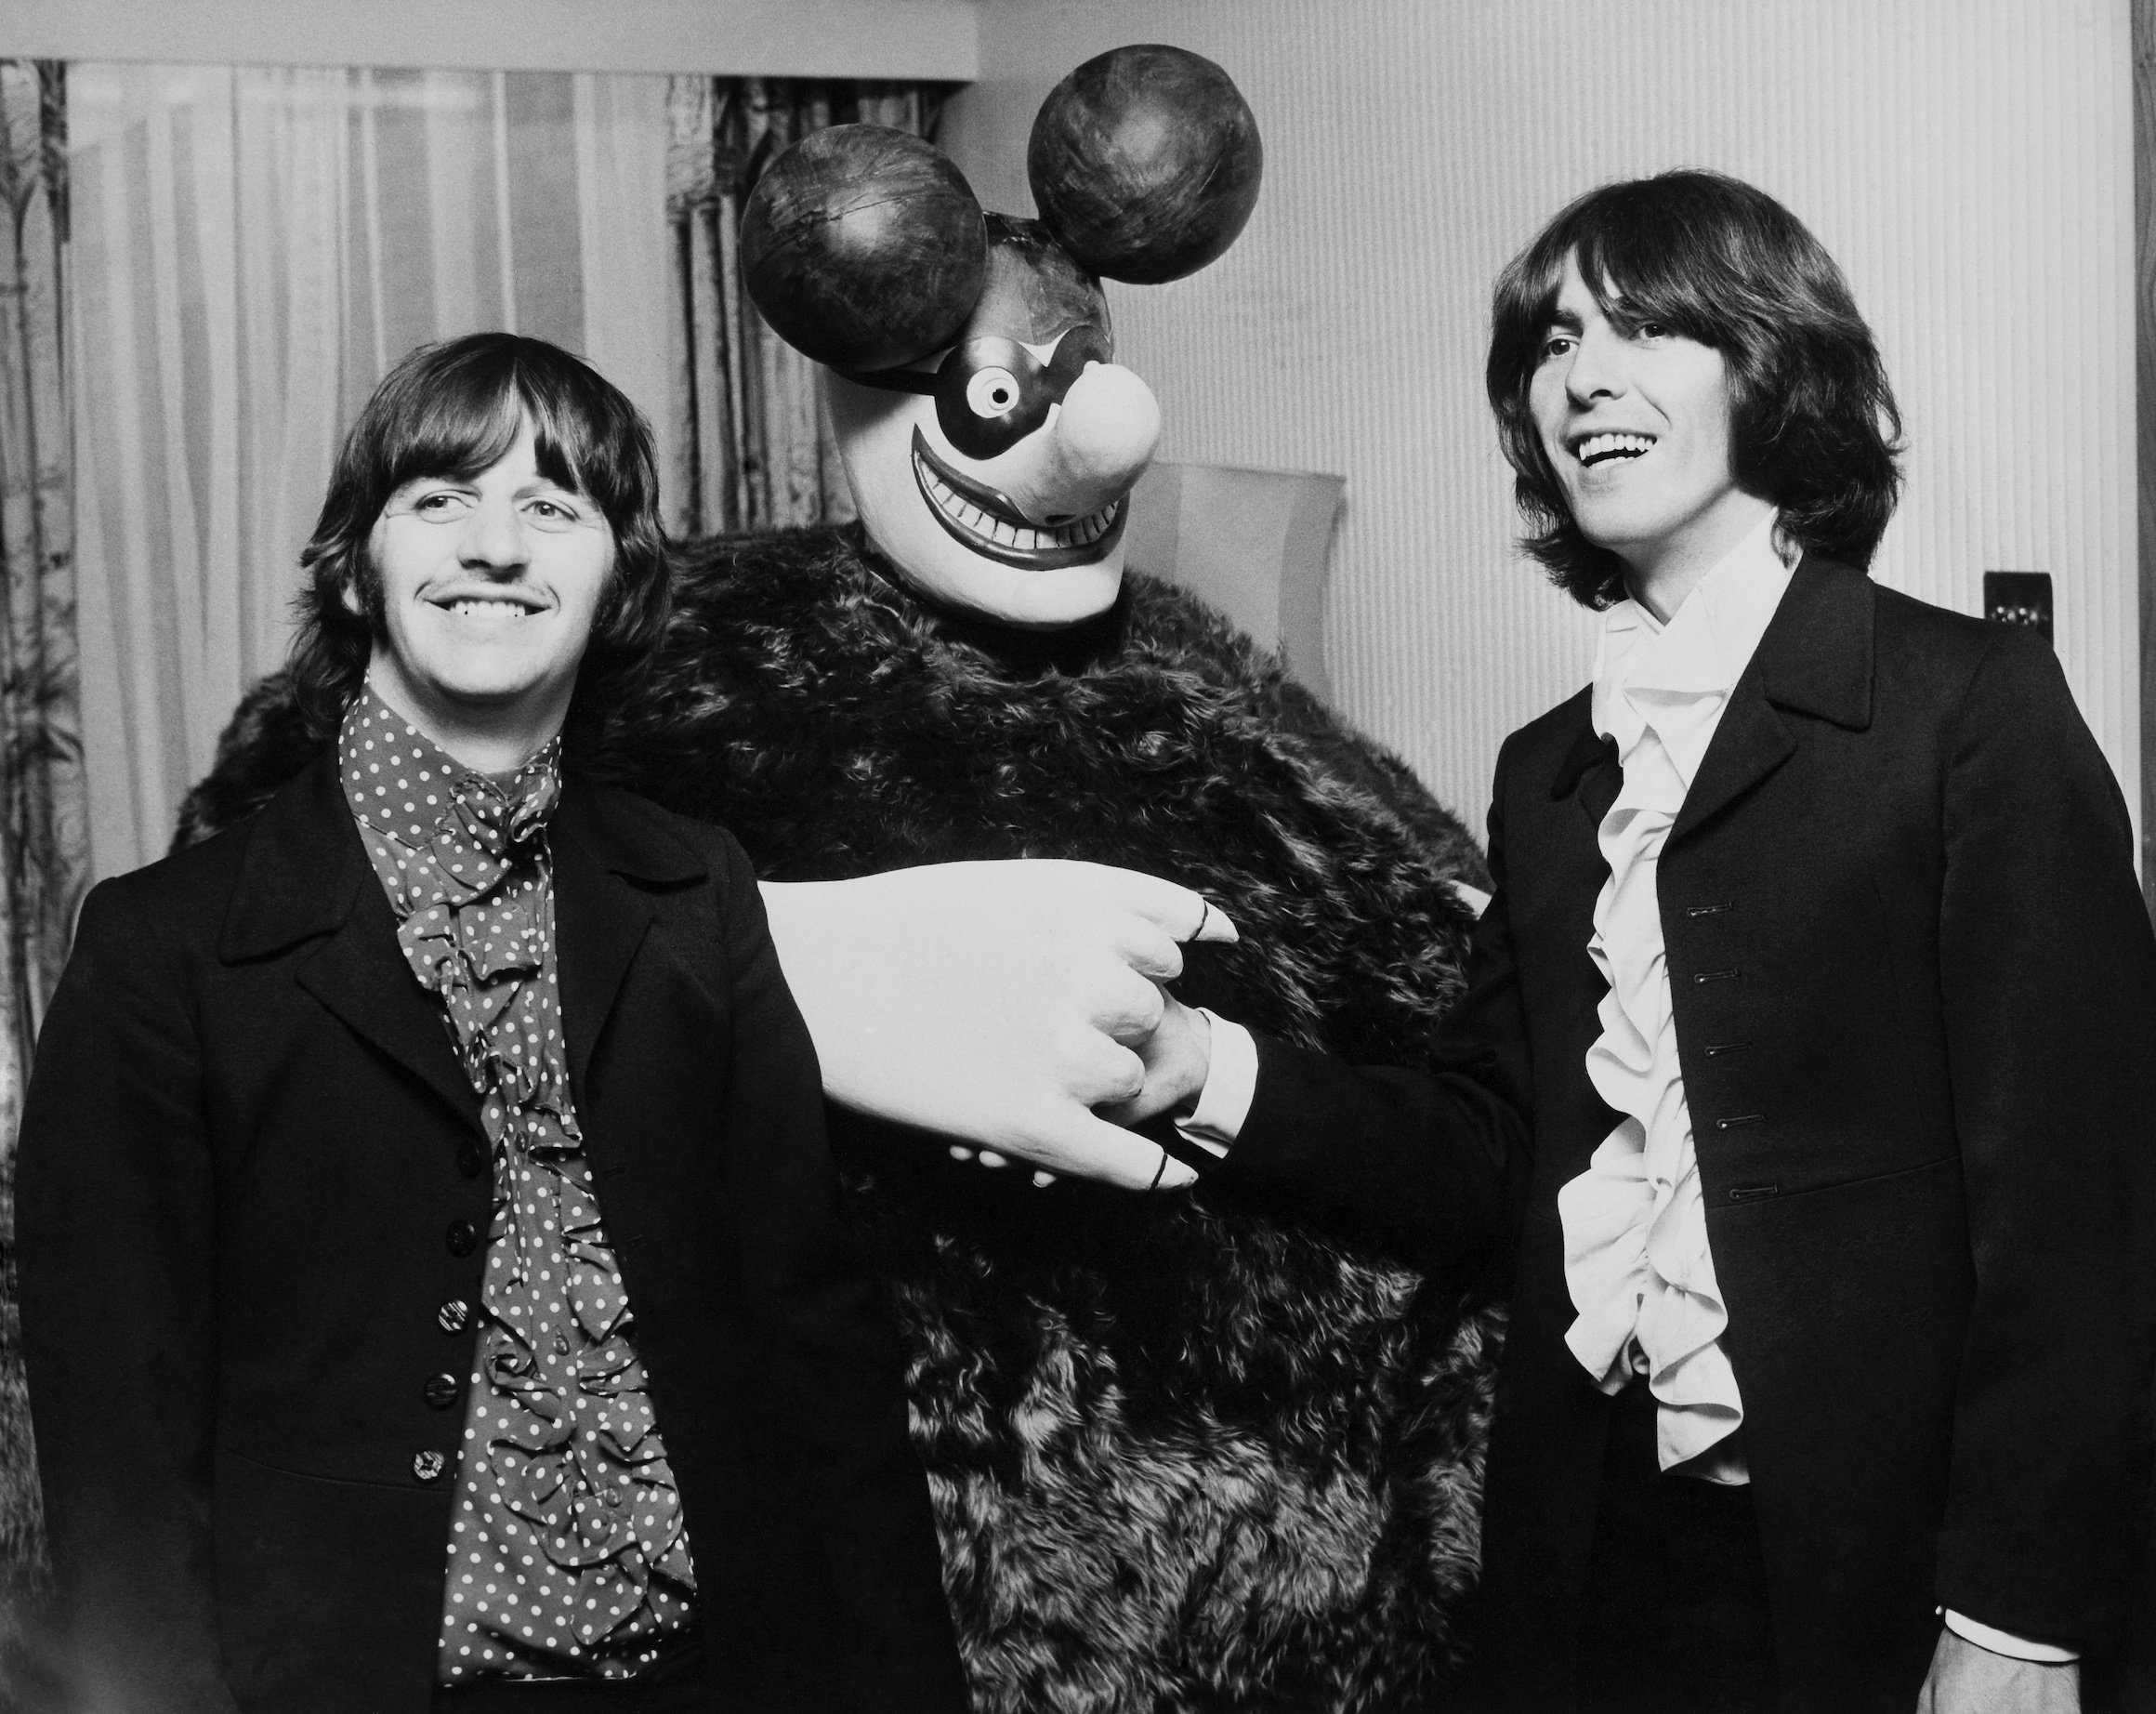 Ringo Starr and George Harrison of The Beatles attend a presentation of Yellow Submarine